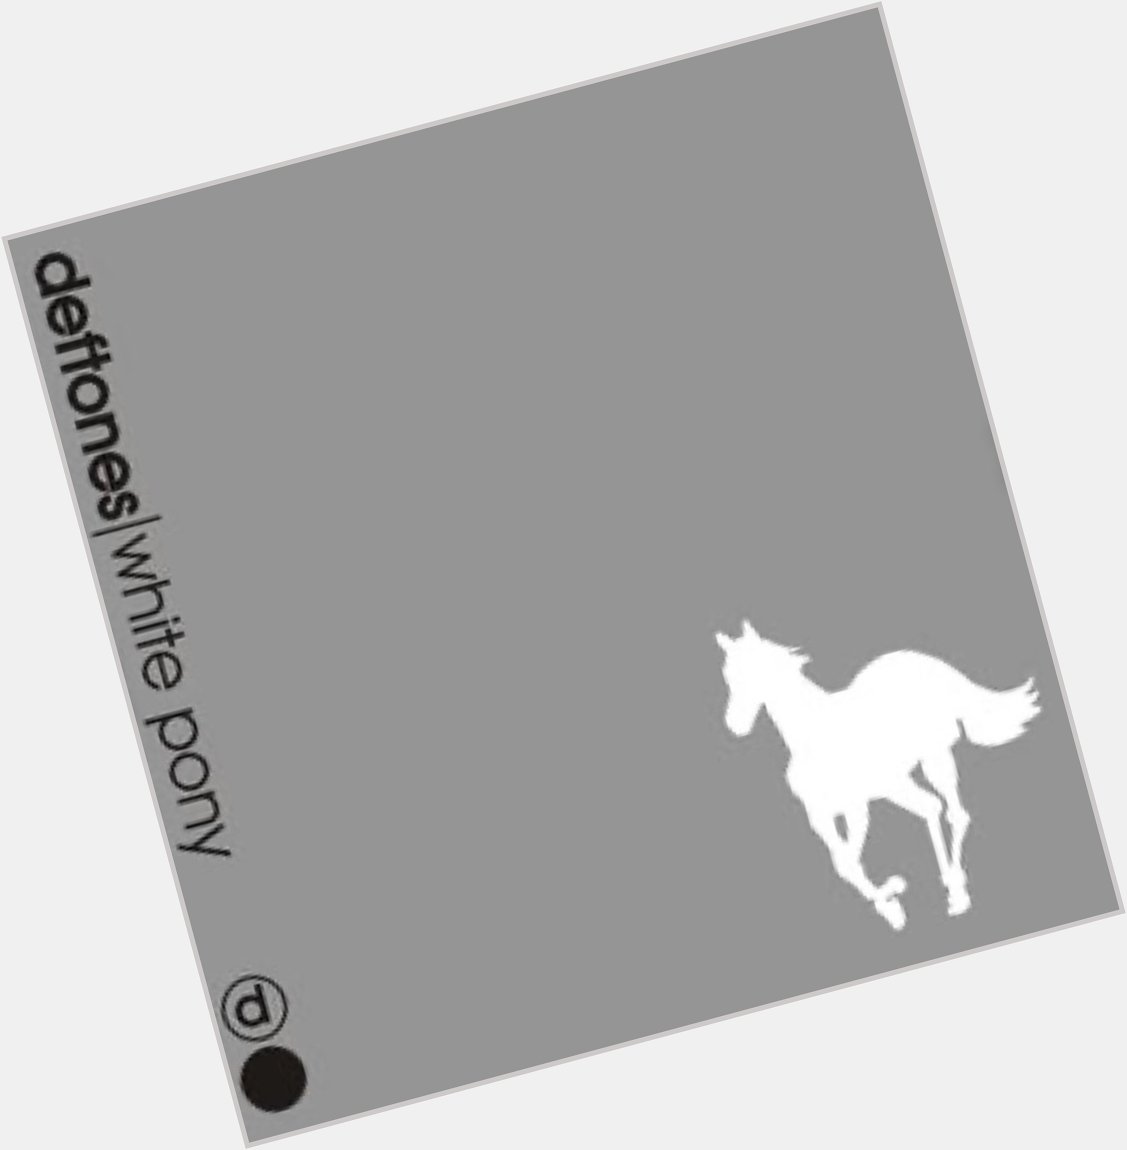 Happy Birthday to Chino Moreno and Happy 20th Birthday to White Pony by Deftones. It s such a dope record. 